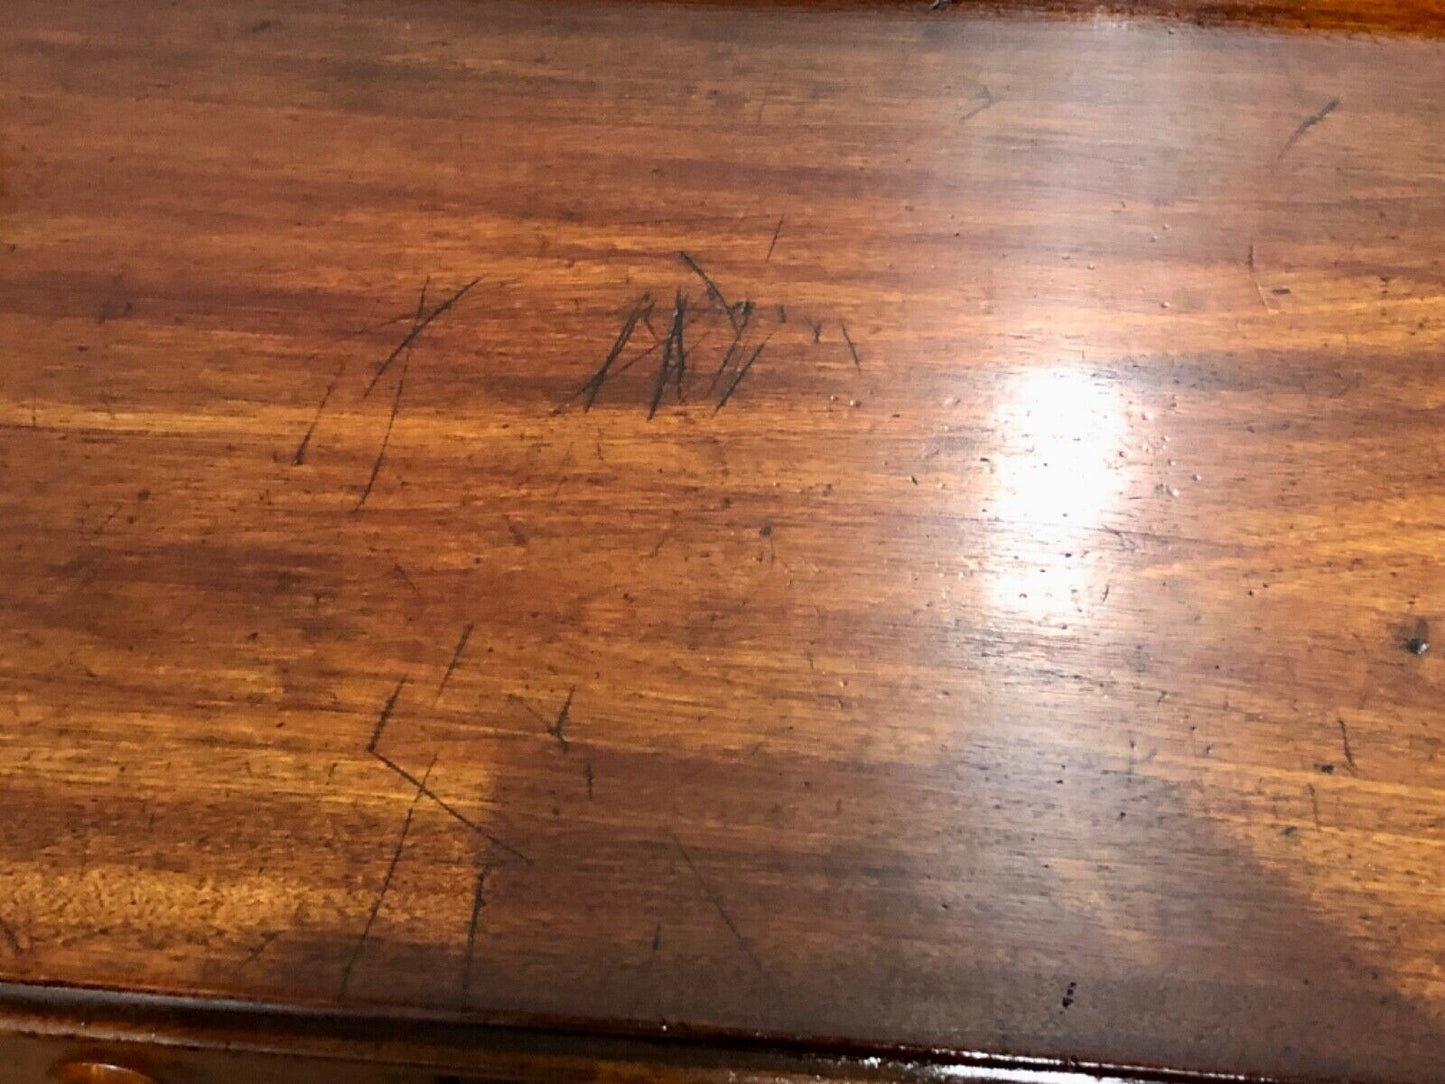 000756....Handsome Antique Mahogany Writing / Hall Table